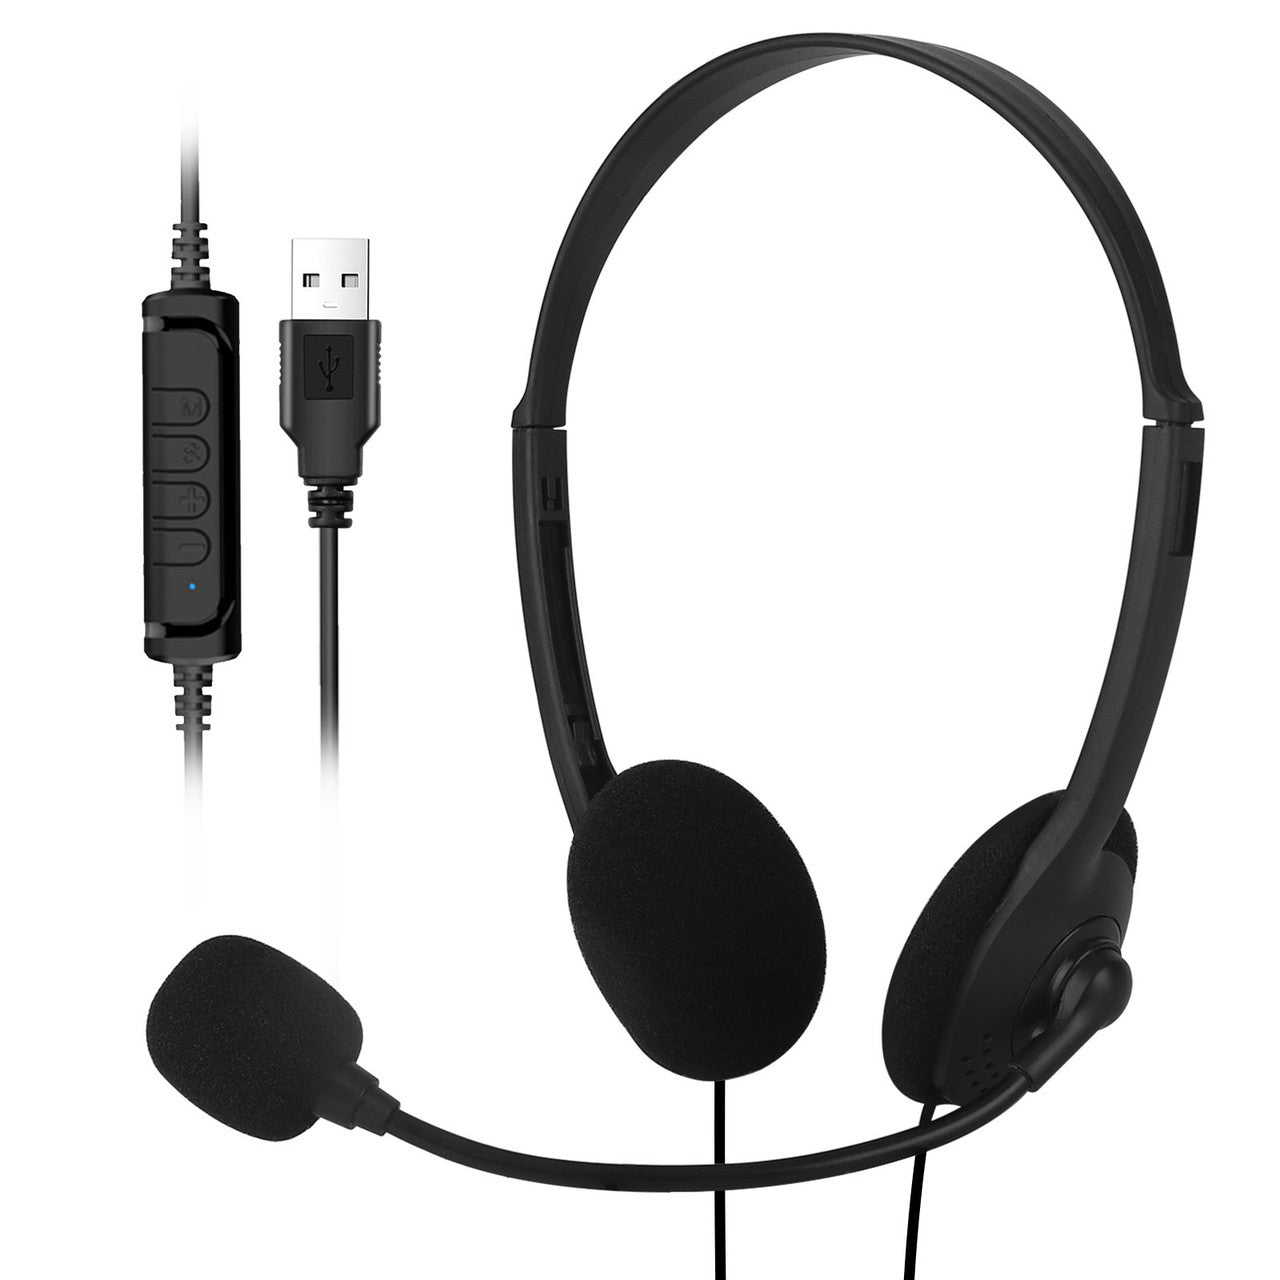 USB Wired Headset with Microphone for Gaming, Chat and More